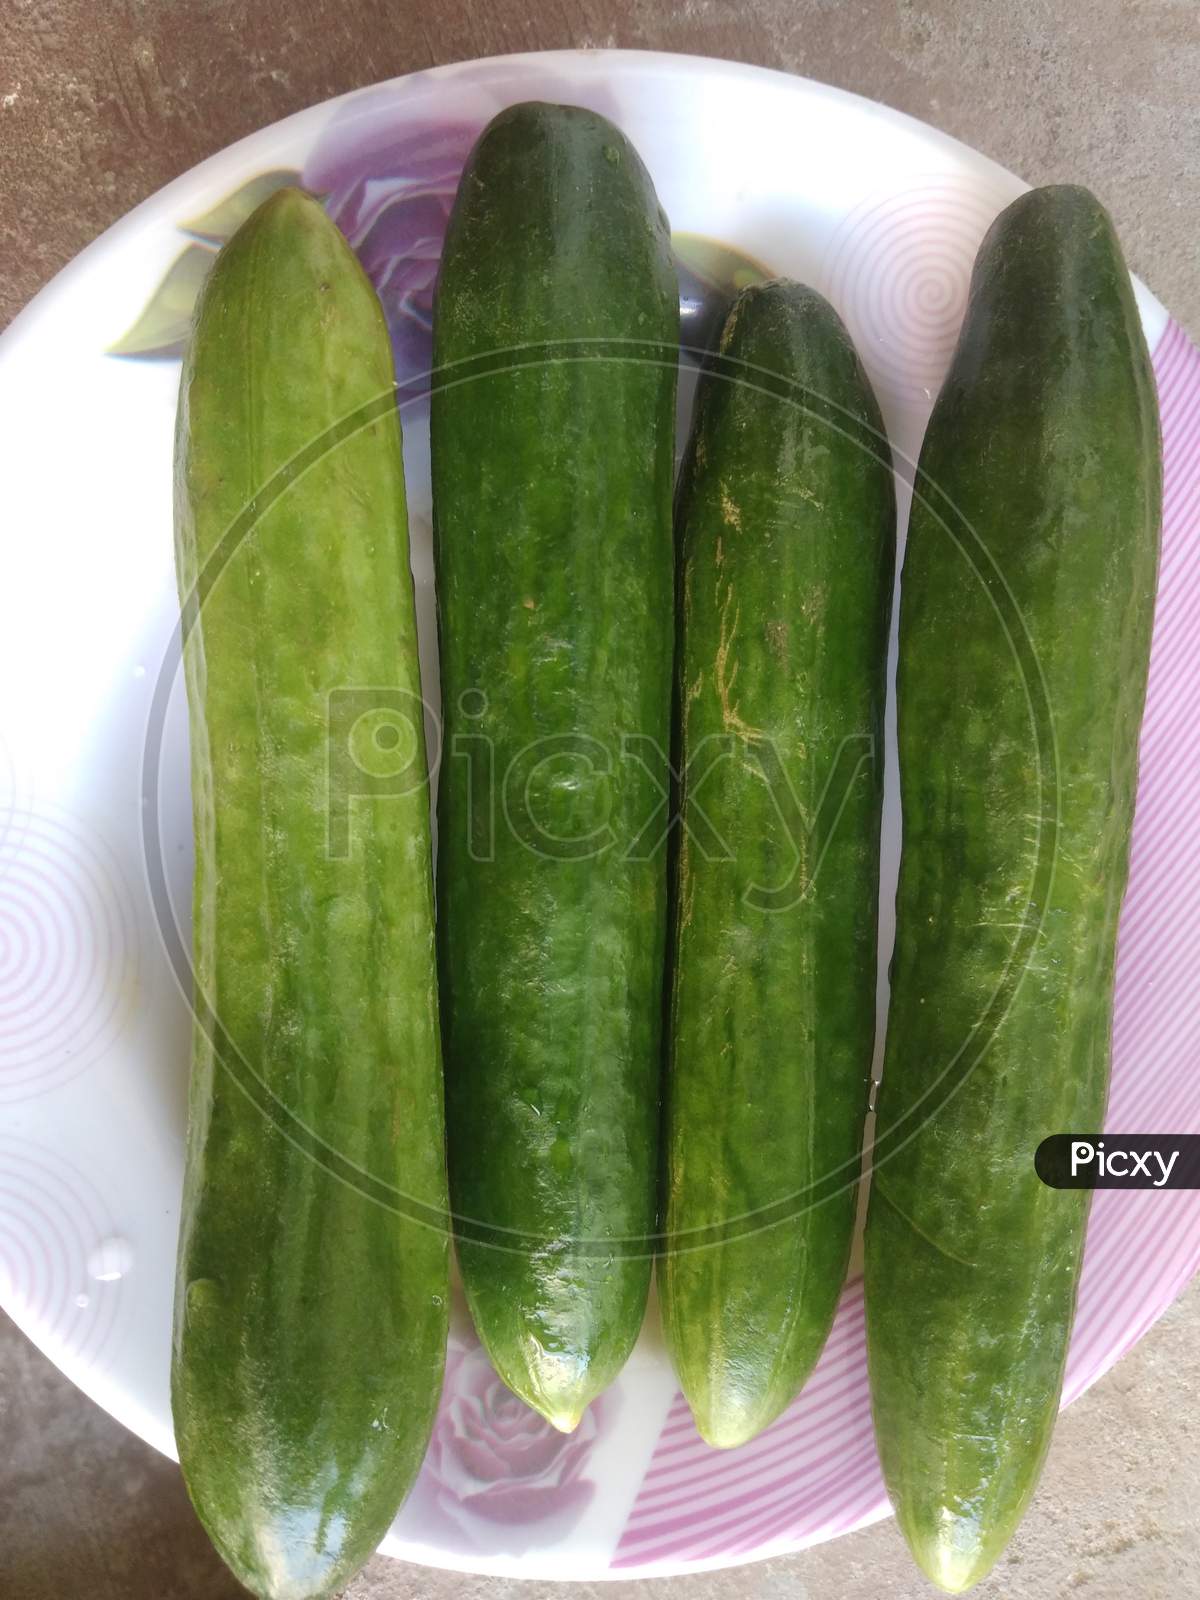 Cucumbers in summer season, in the day time, in mirpur Azad Kashmir.